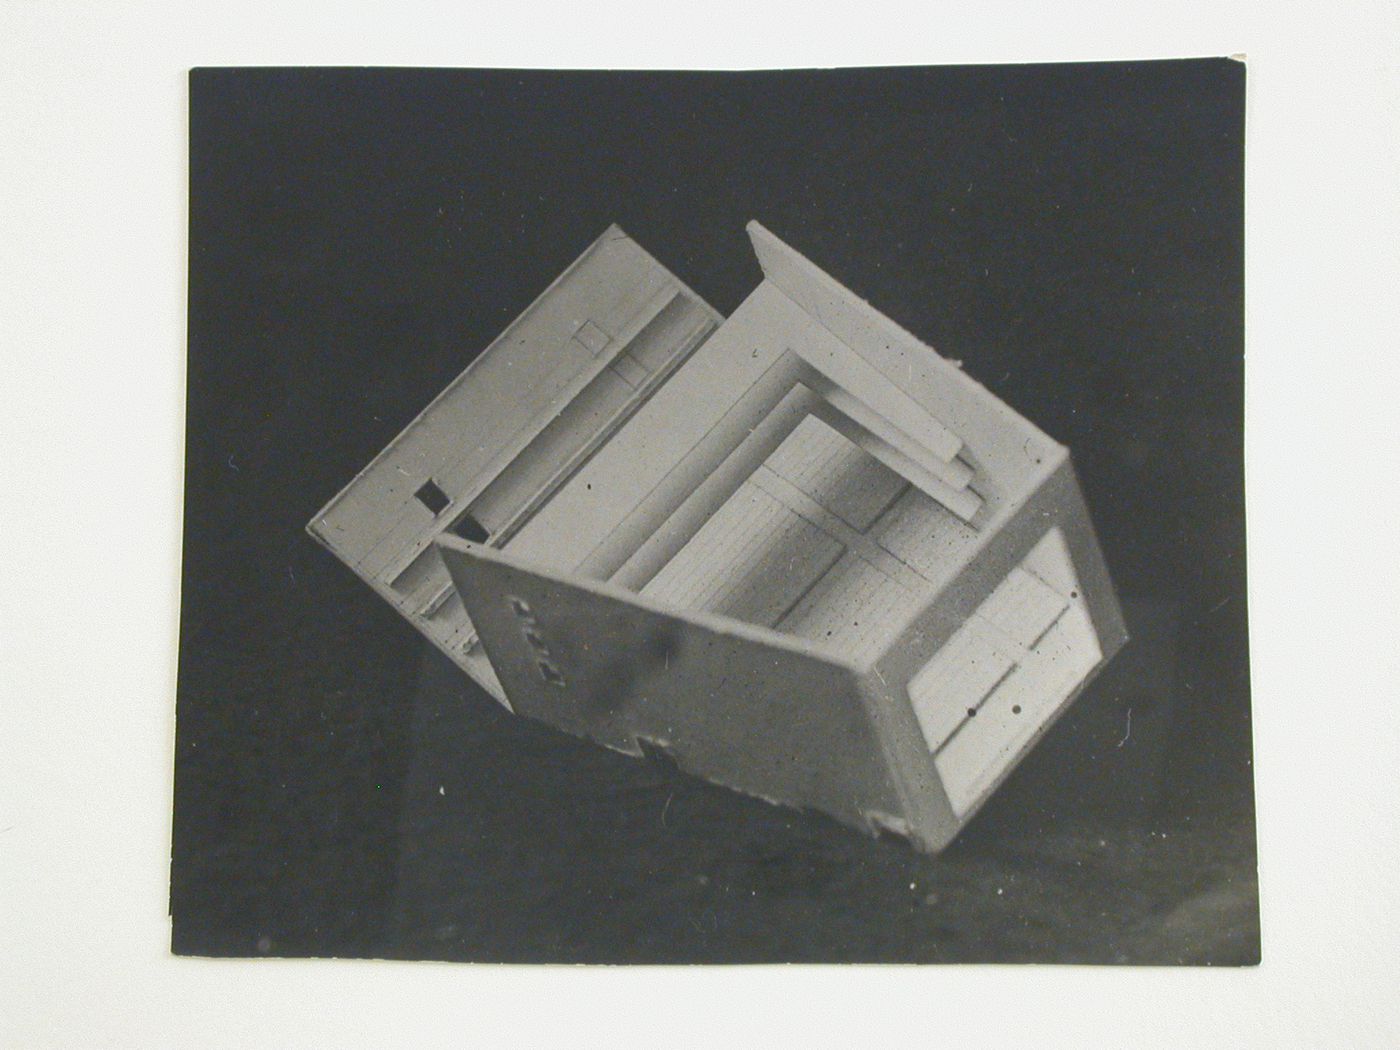 Photograph of a model for a motion picture theater/concert hall for an All-Union Palace of the Arts, Moscow